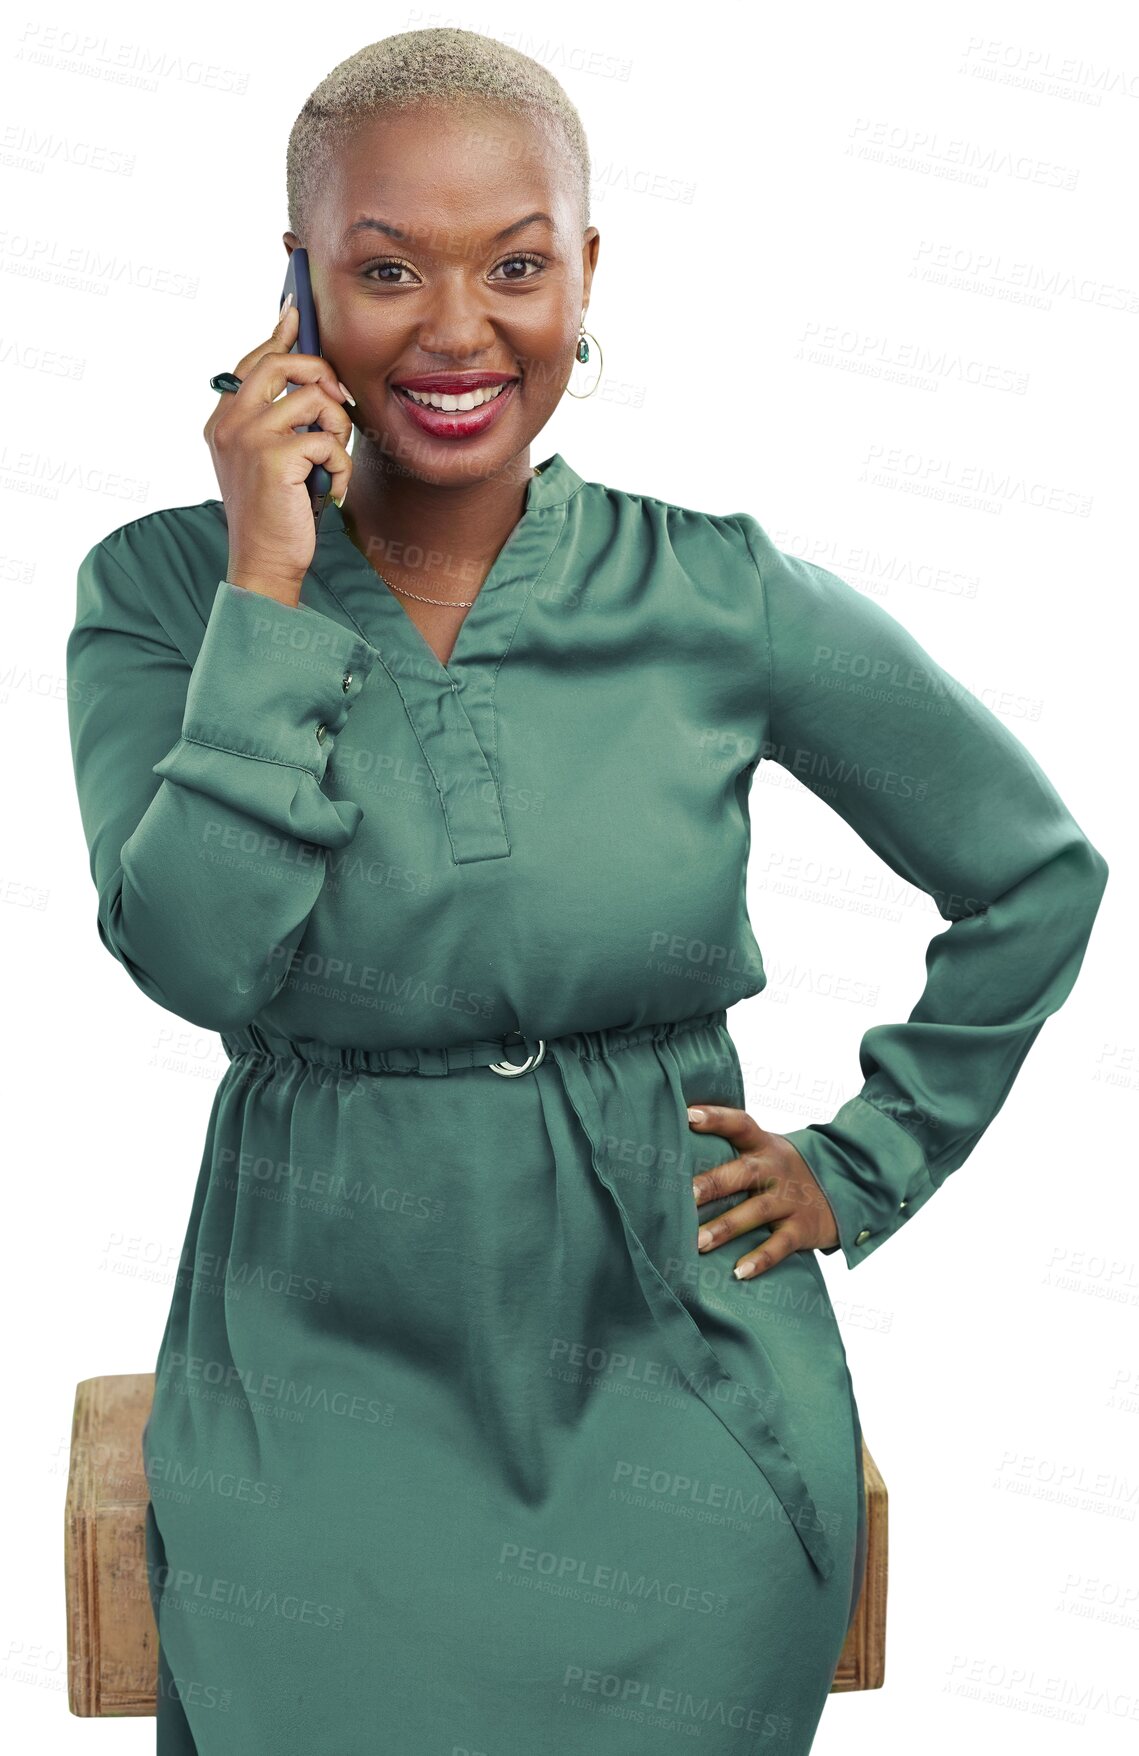 Buy stock photo Phone call, smile and happy portrait, black woman isolated on transparent png background, communication and networking. Conversation, discussion and African businesswoman on cellphone with connection